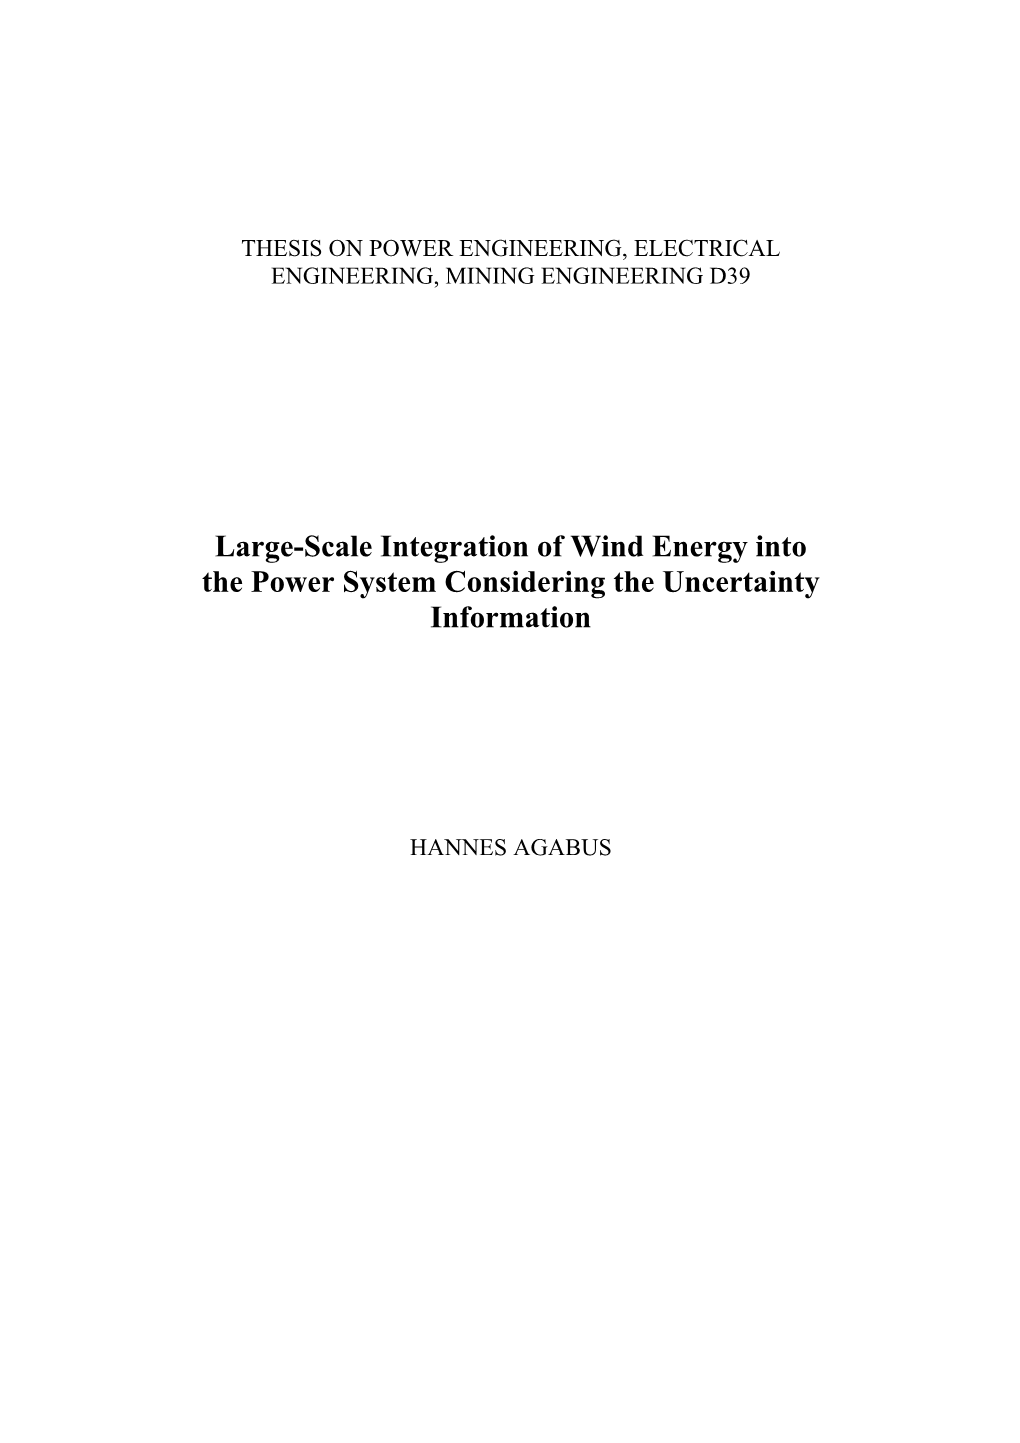 Large-Scale Wind Intecration Into the Estonian Power System